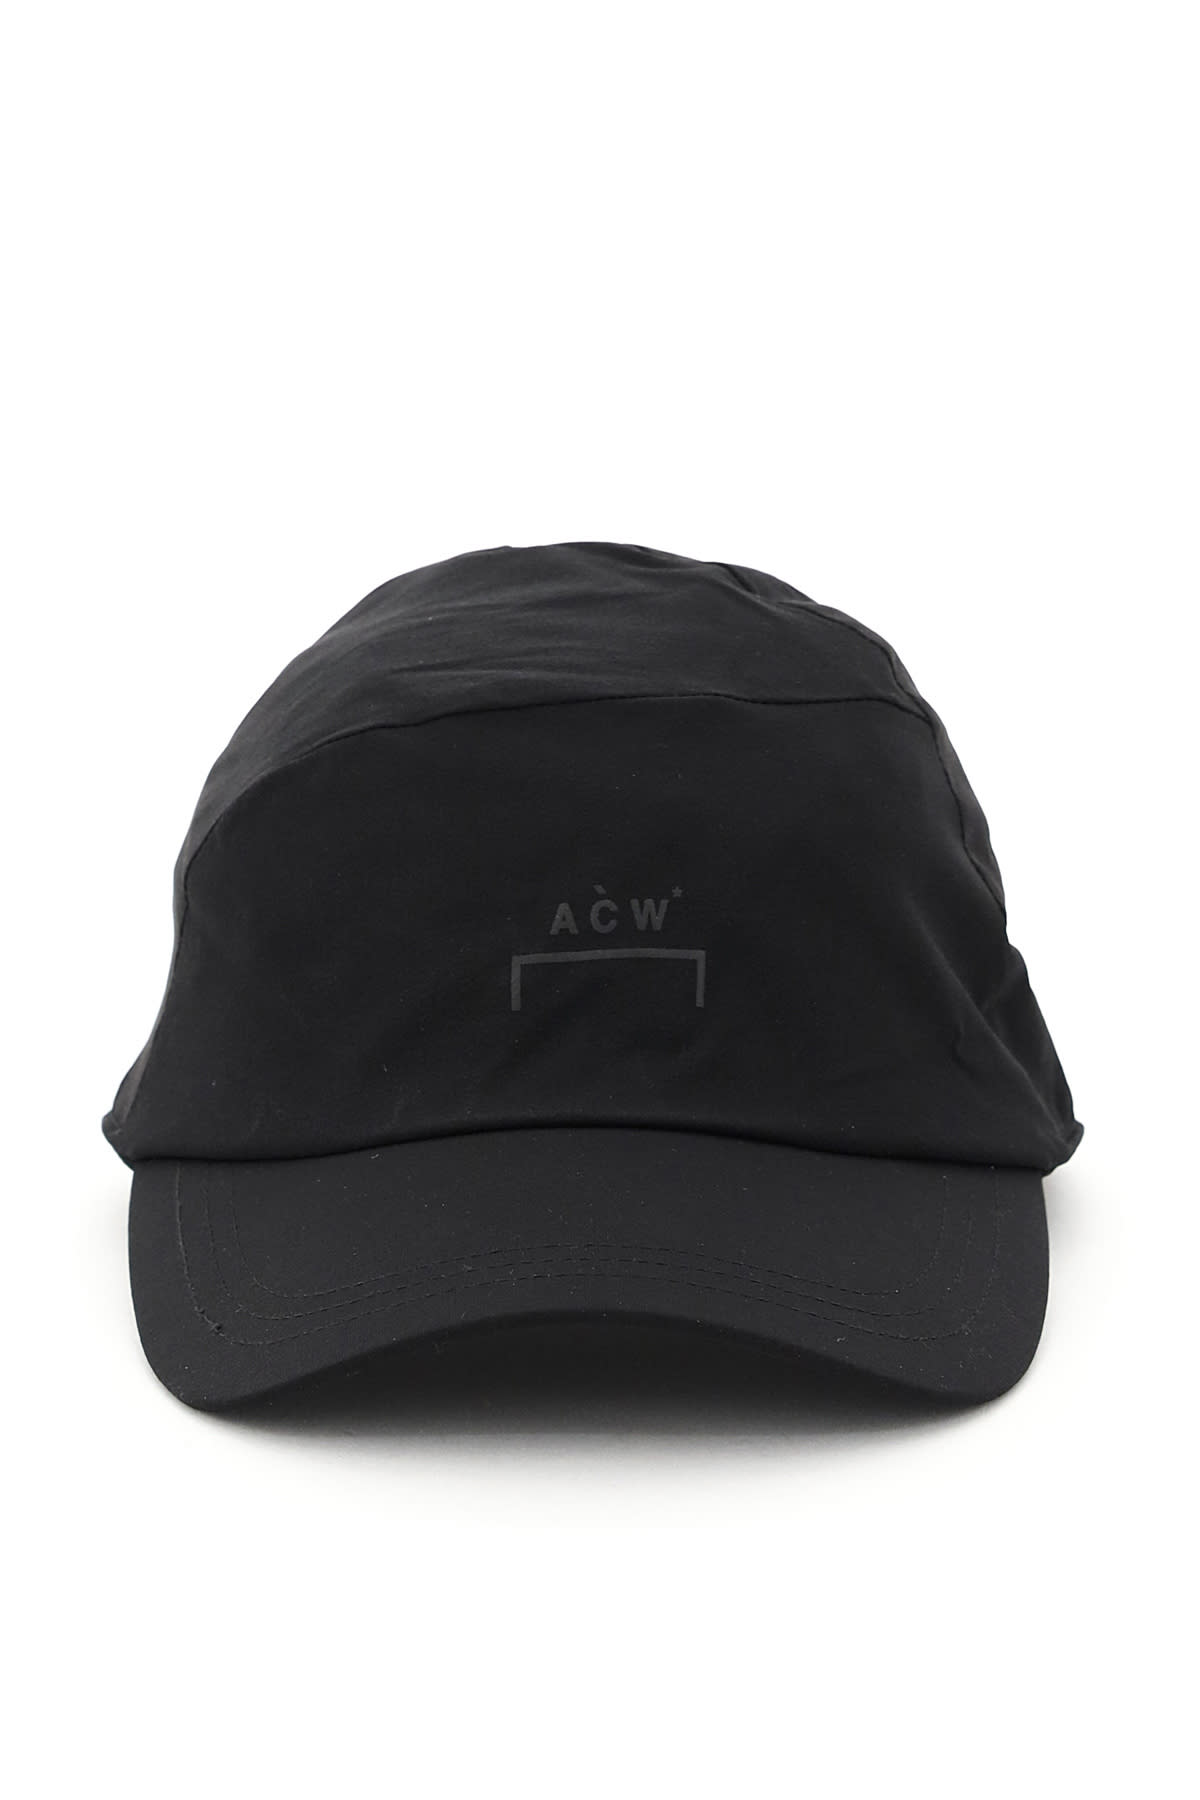 A-COLD-WALL Working Professional Baseball Cap